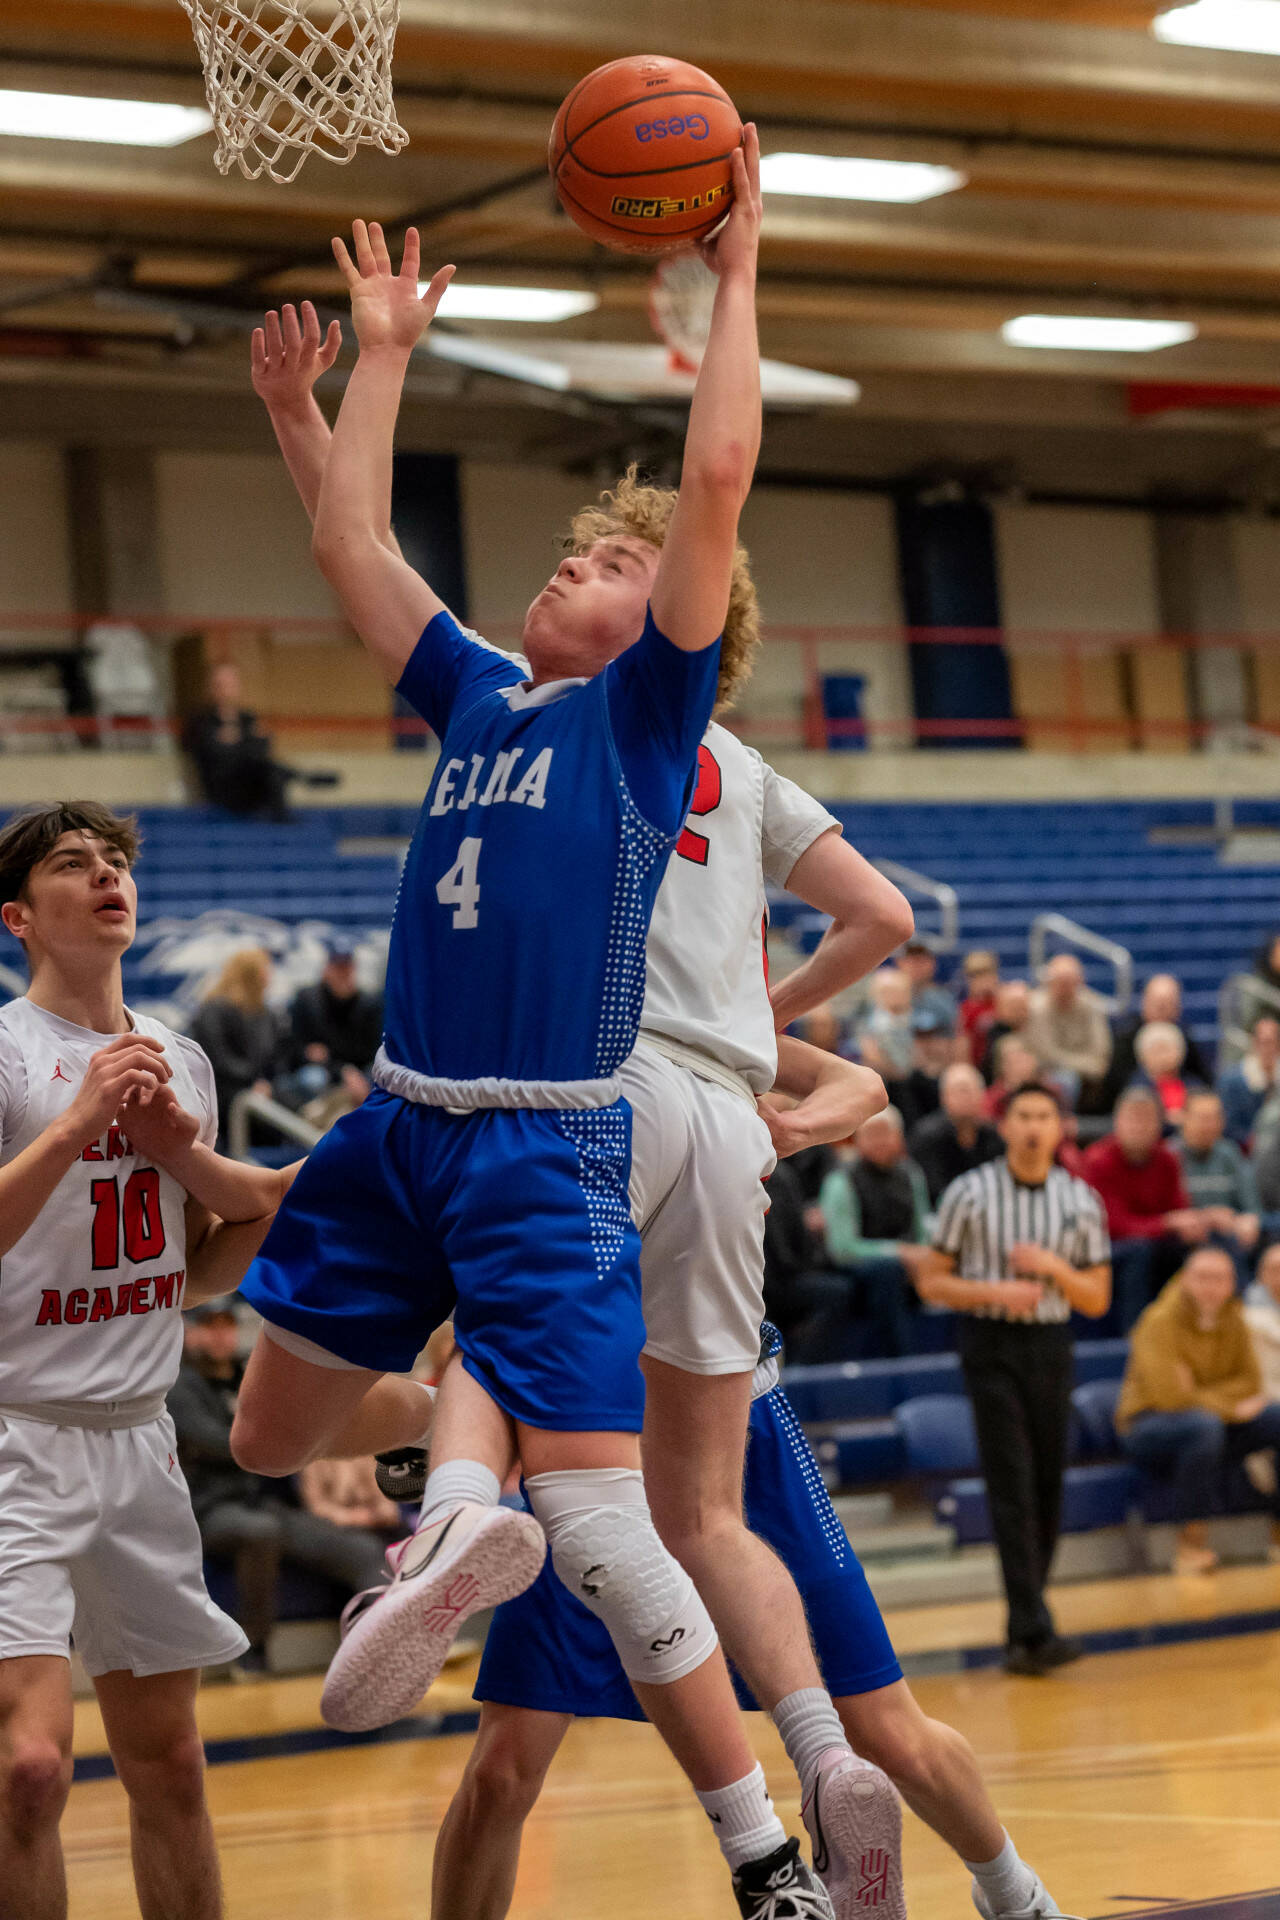 PHOTO BY FOREST WORGUM Elma’s Grant Vessey drives to the basket during the Eagles’ 71-56 loss to Seattle Academy in a 1A State playoff game on Saturday at W.F. West High School in Chehalis.